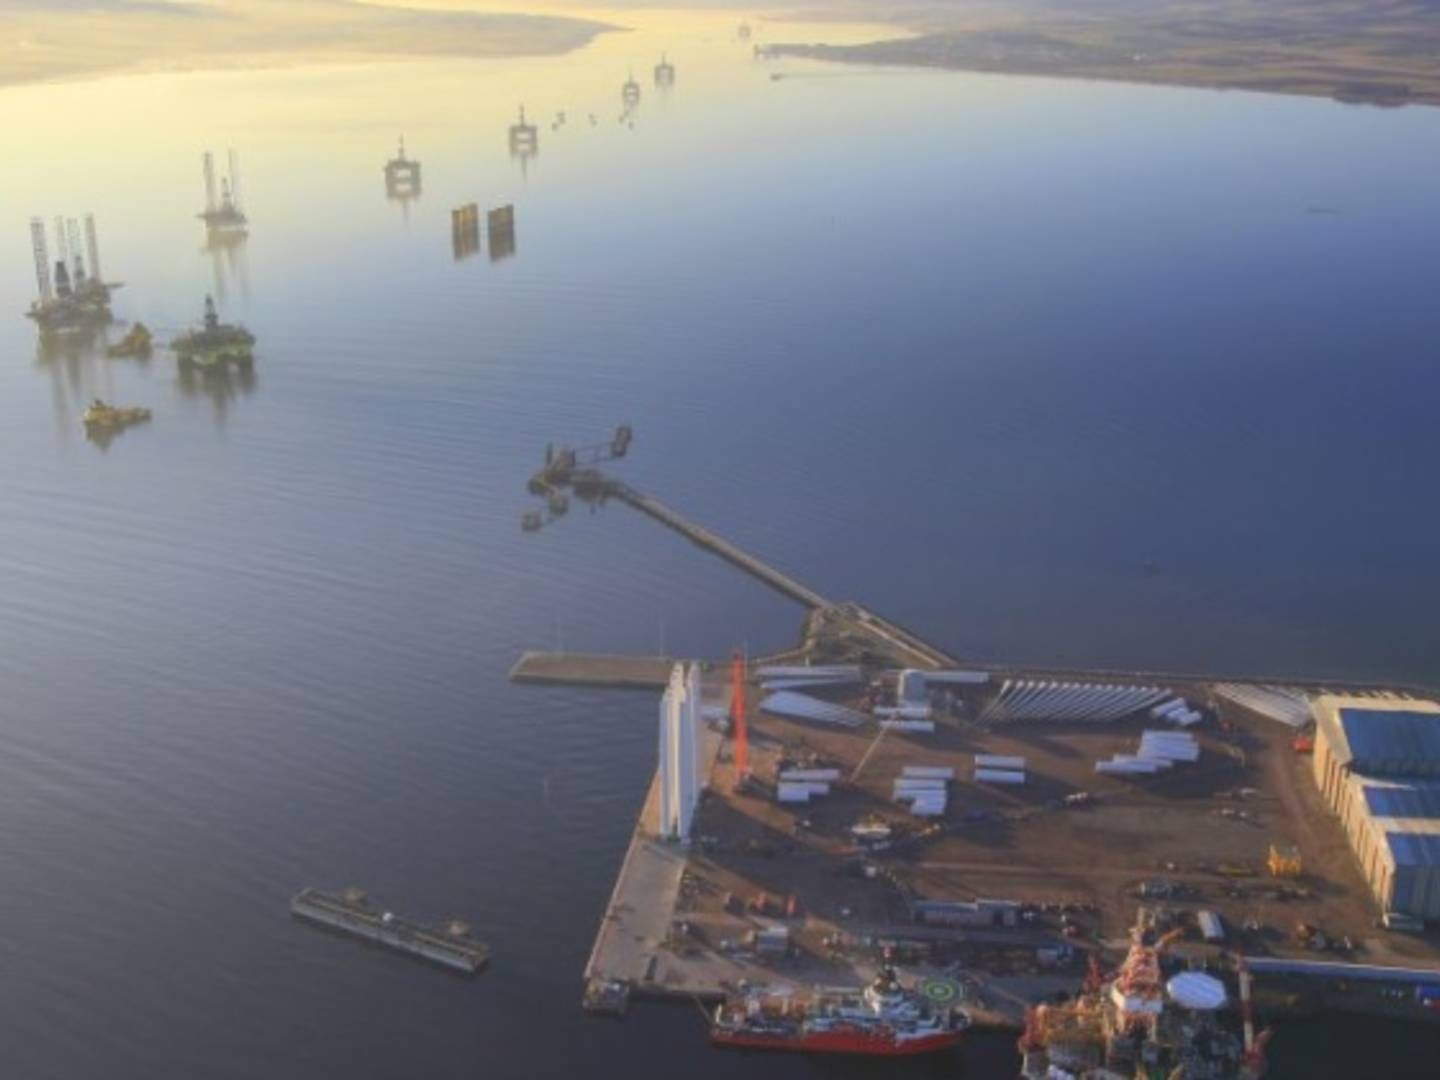 If the Nigg factory is realized, it could become the largest in the UK. | Photo: Global Energy Group, GEG